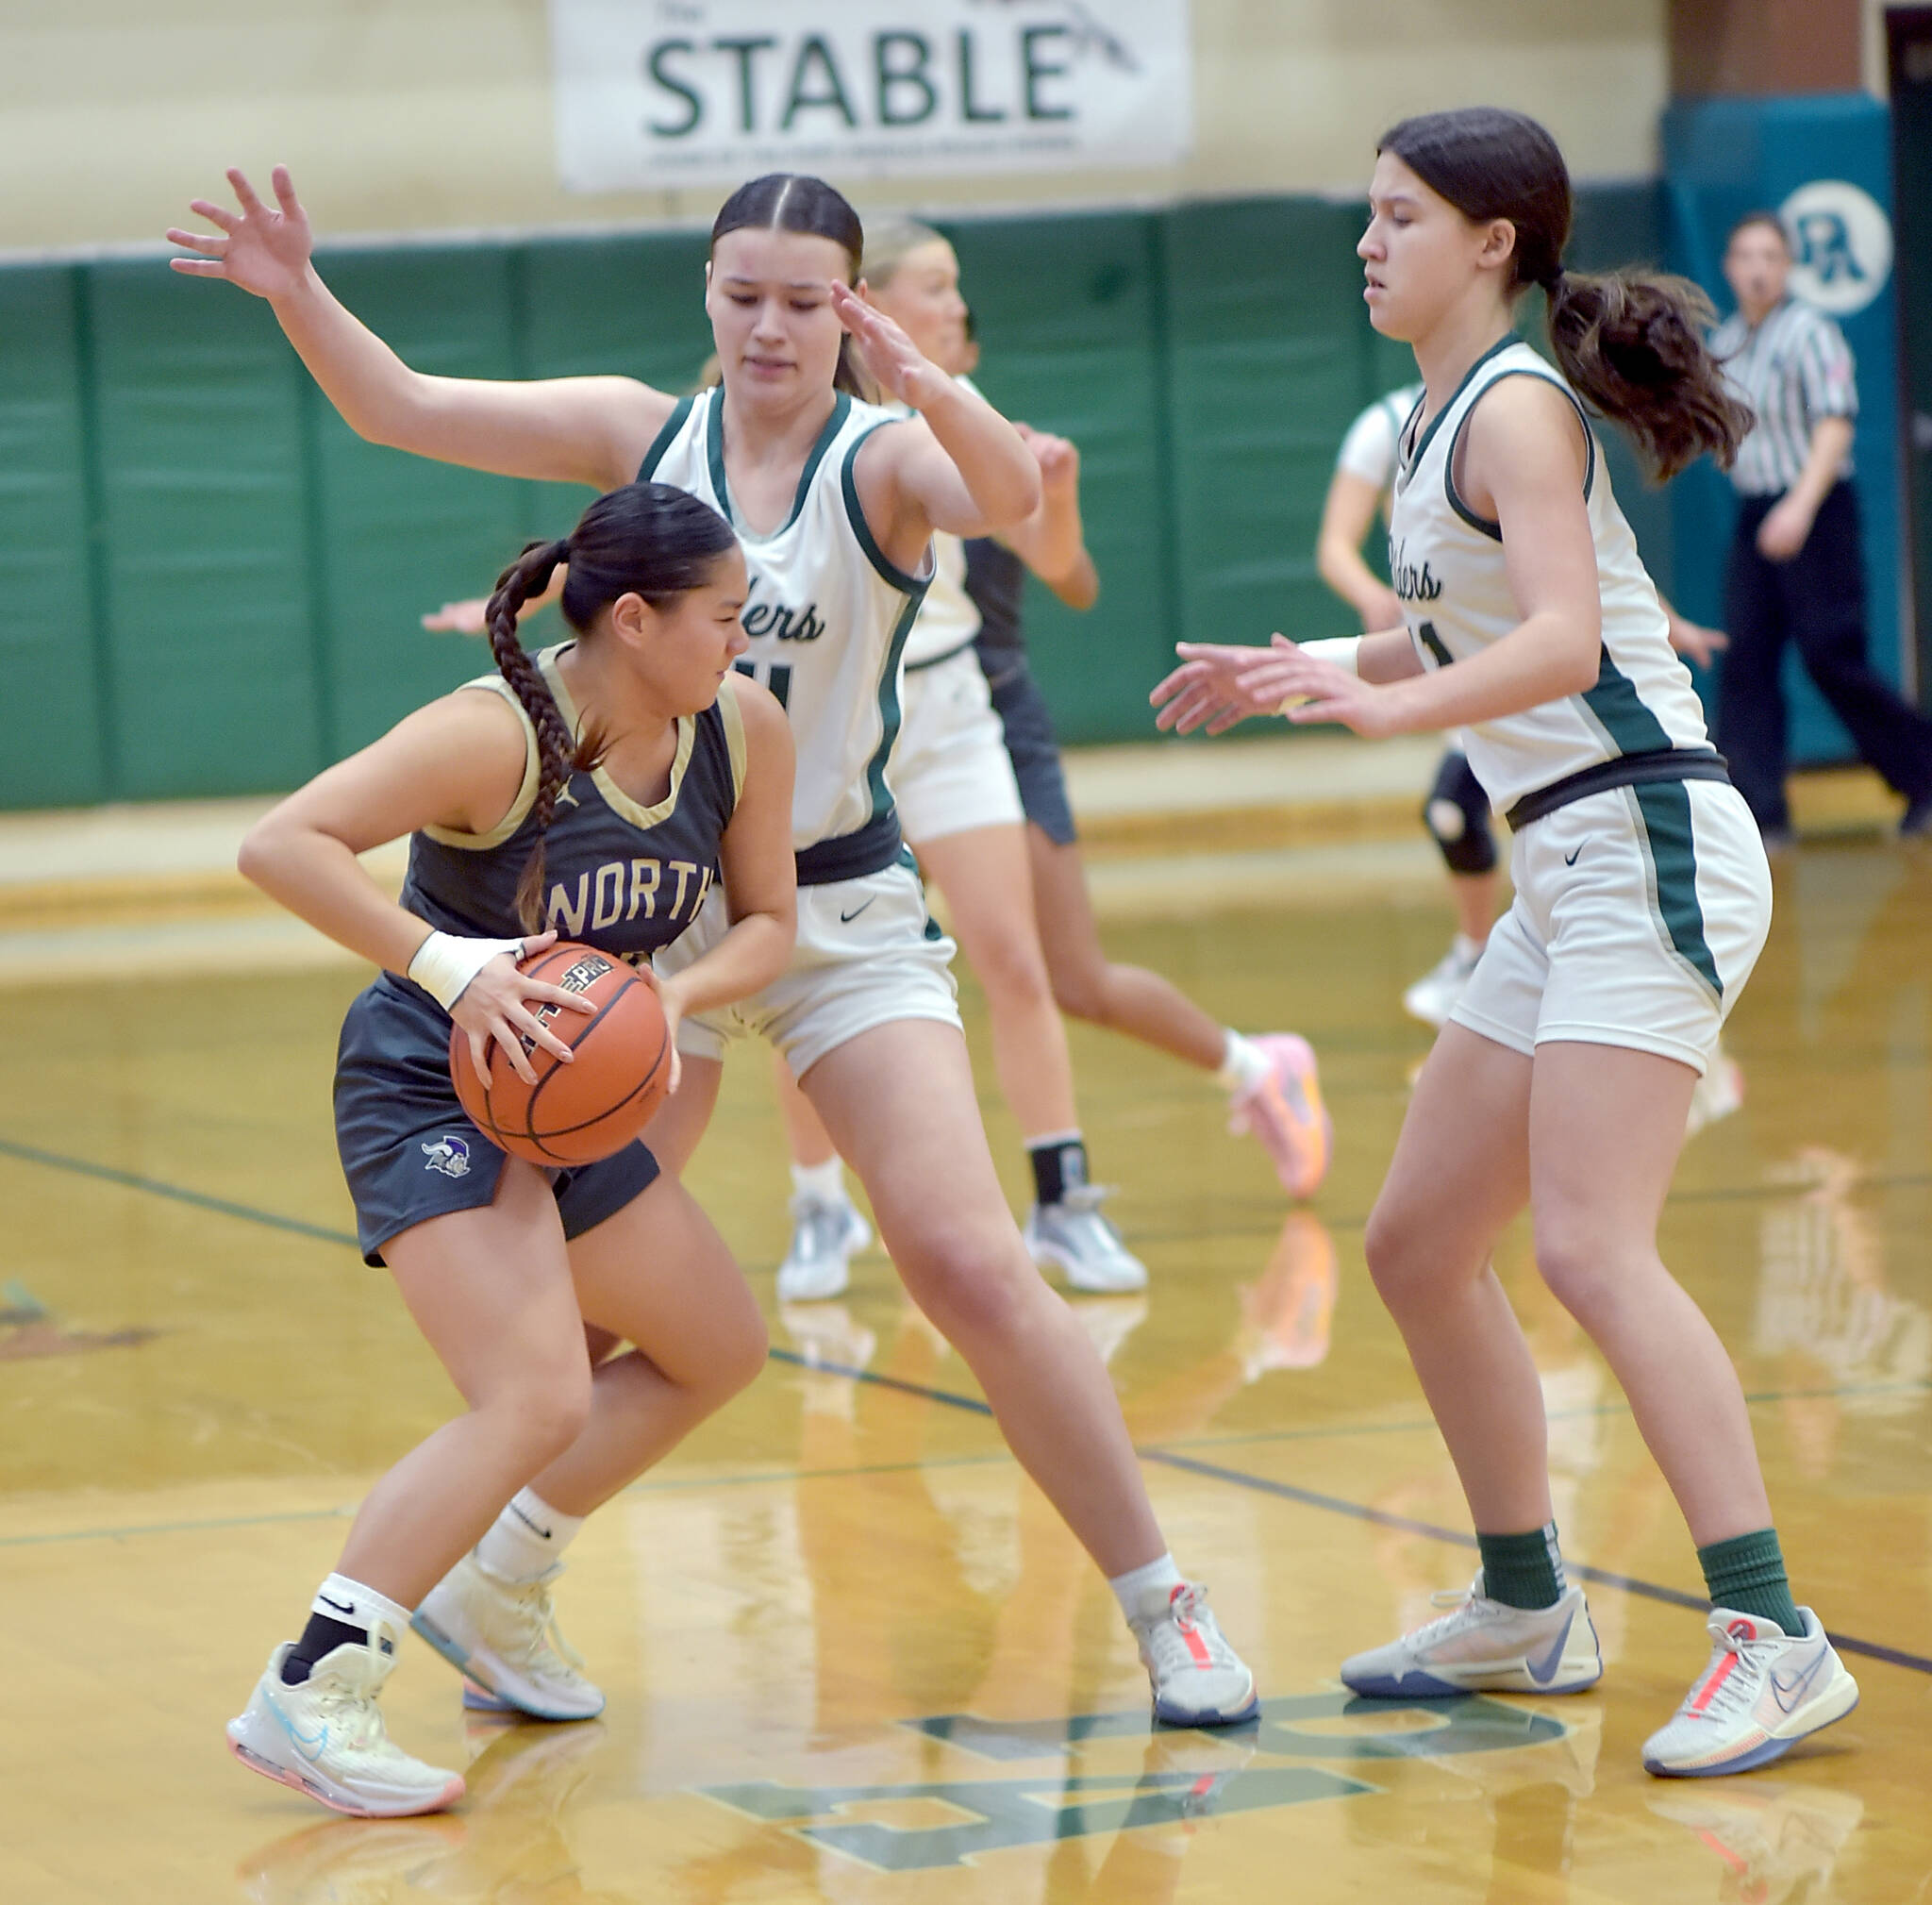 Keith Thorpe courtesy photos
North Kitsap’s Tiffany Le, left, tries to evade the defense of Port Angeles’ Lexie Smith, center, and Lindsay Smith, right, on Tuesday at Port Angeles High School.